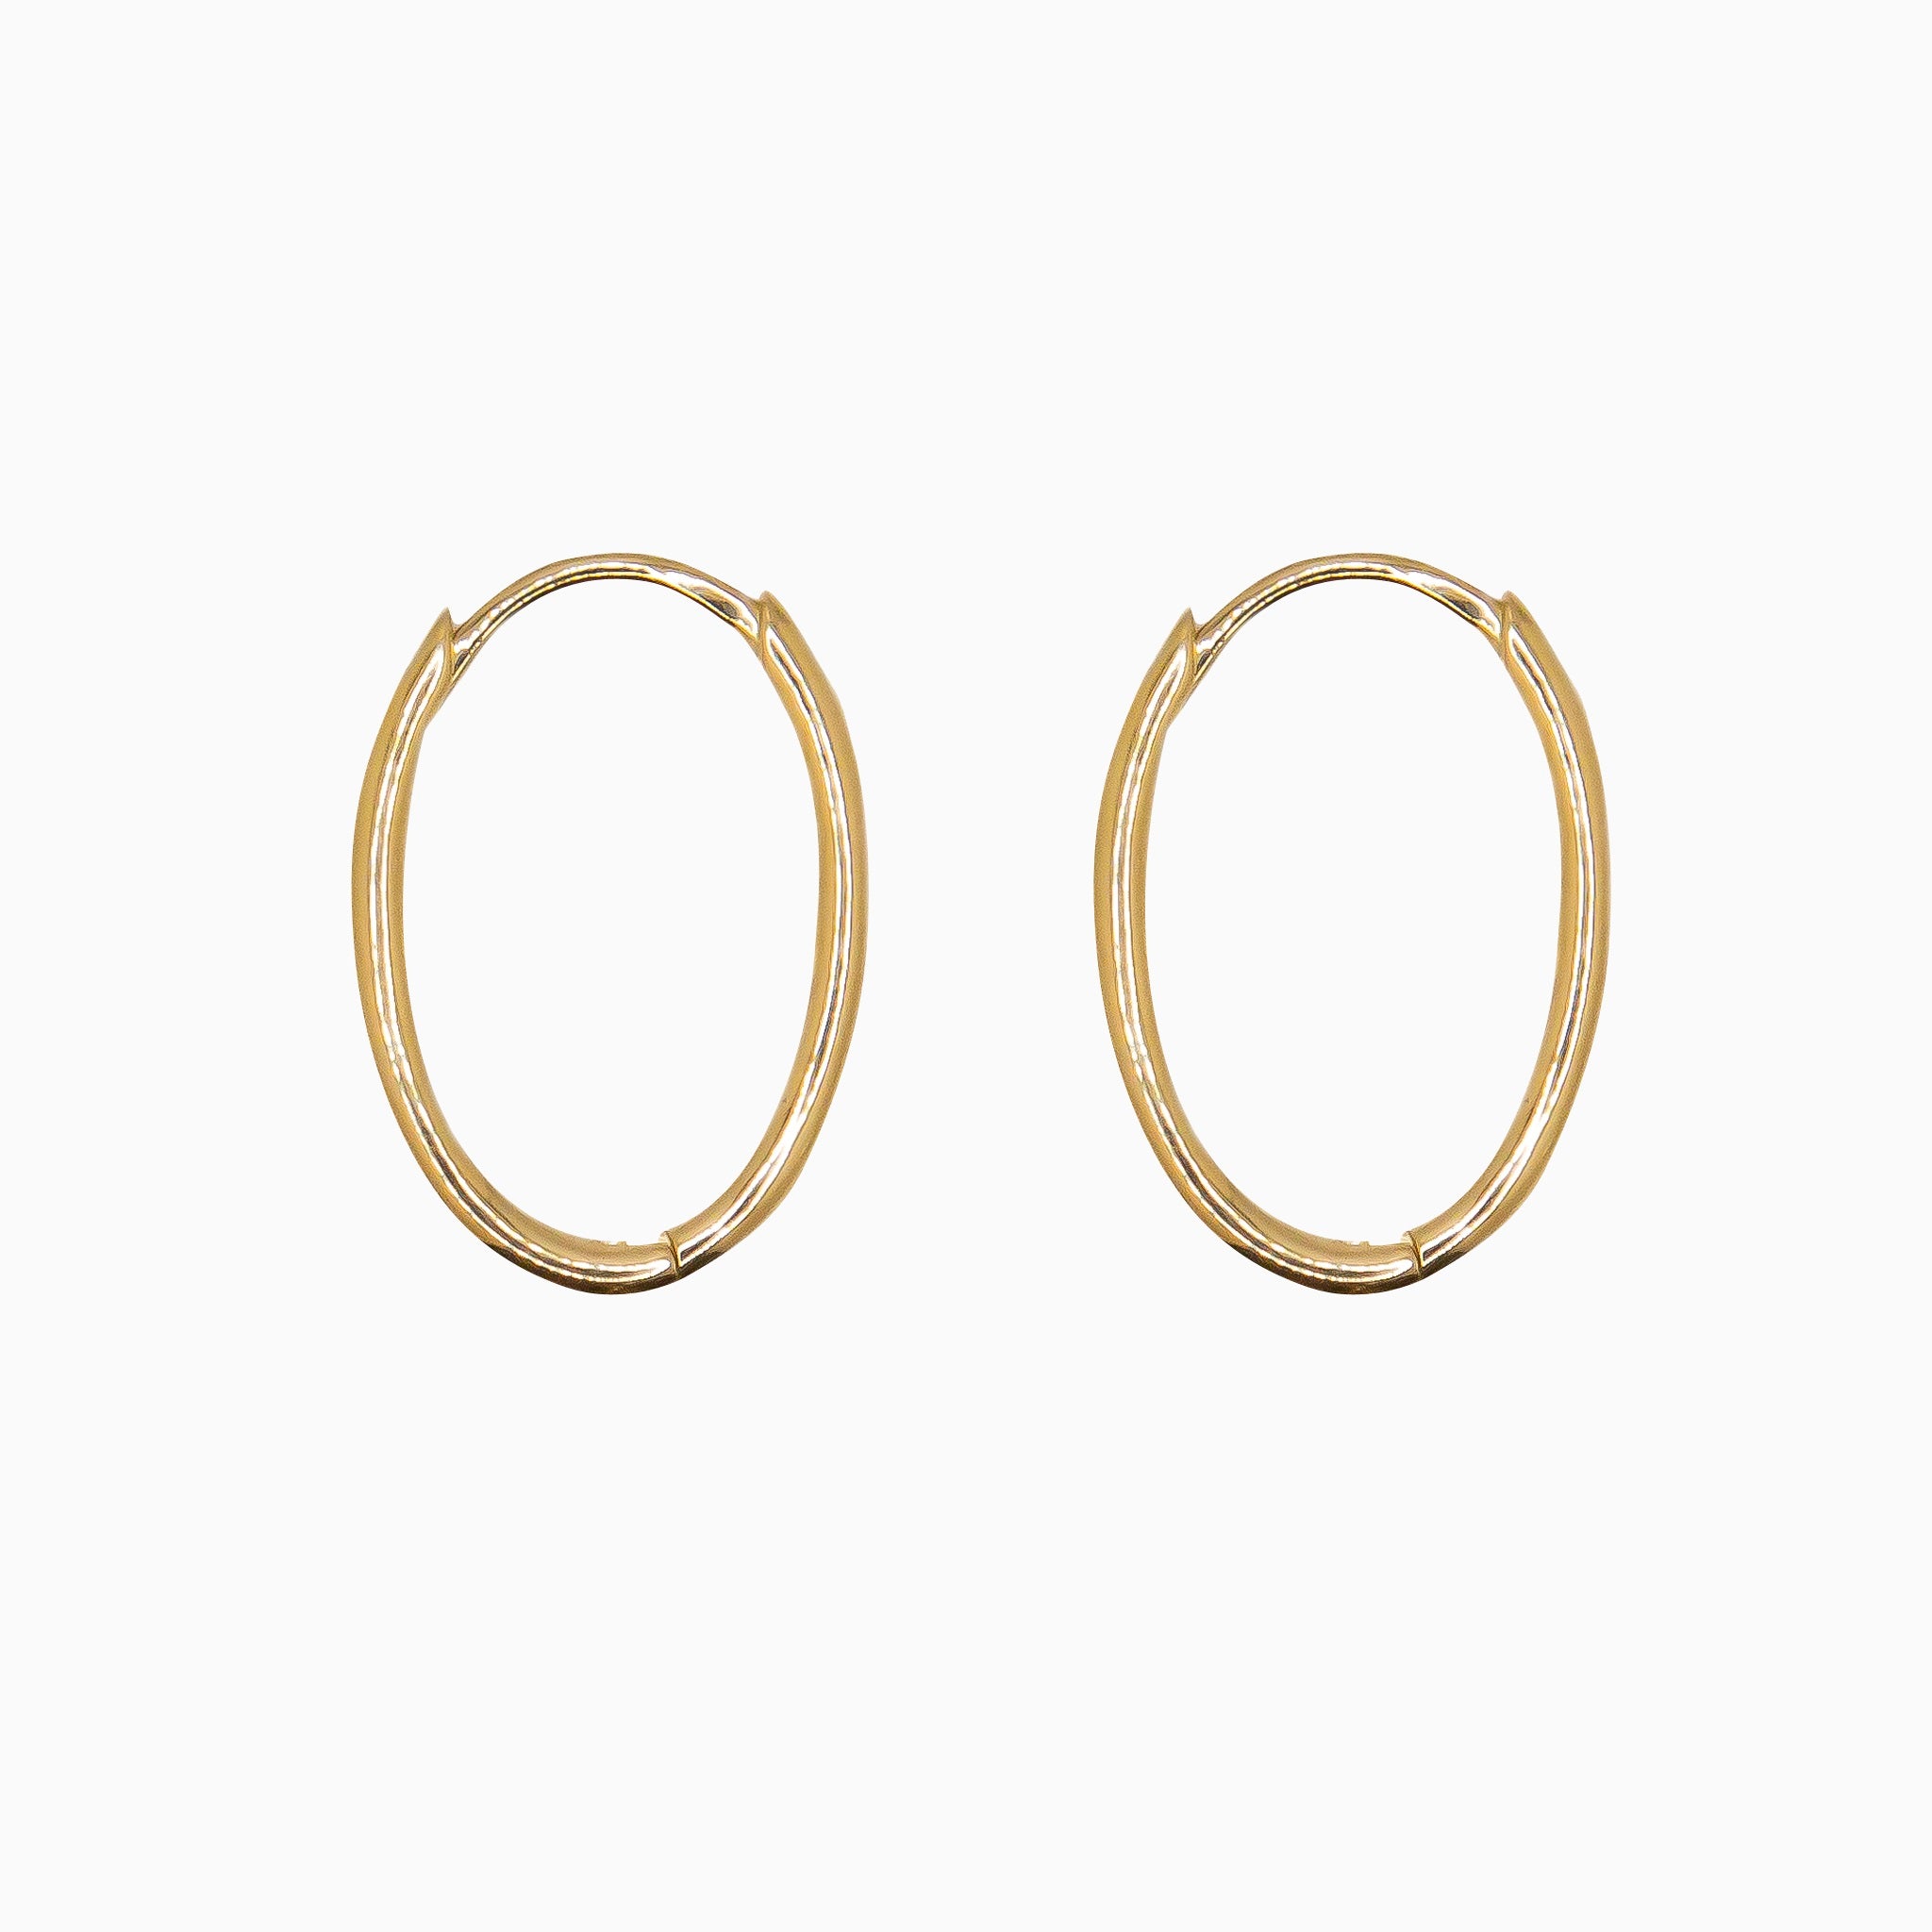 14k Yellow Gold 13mm x 9mm Hinged Everyday Oval Solid Hoop Earrings, Side View